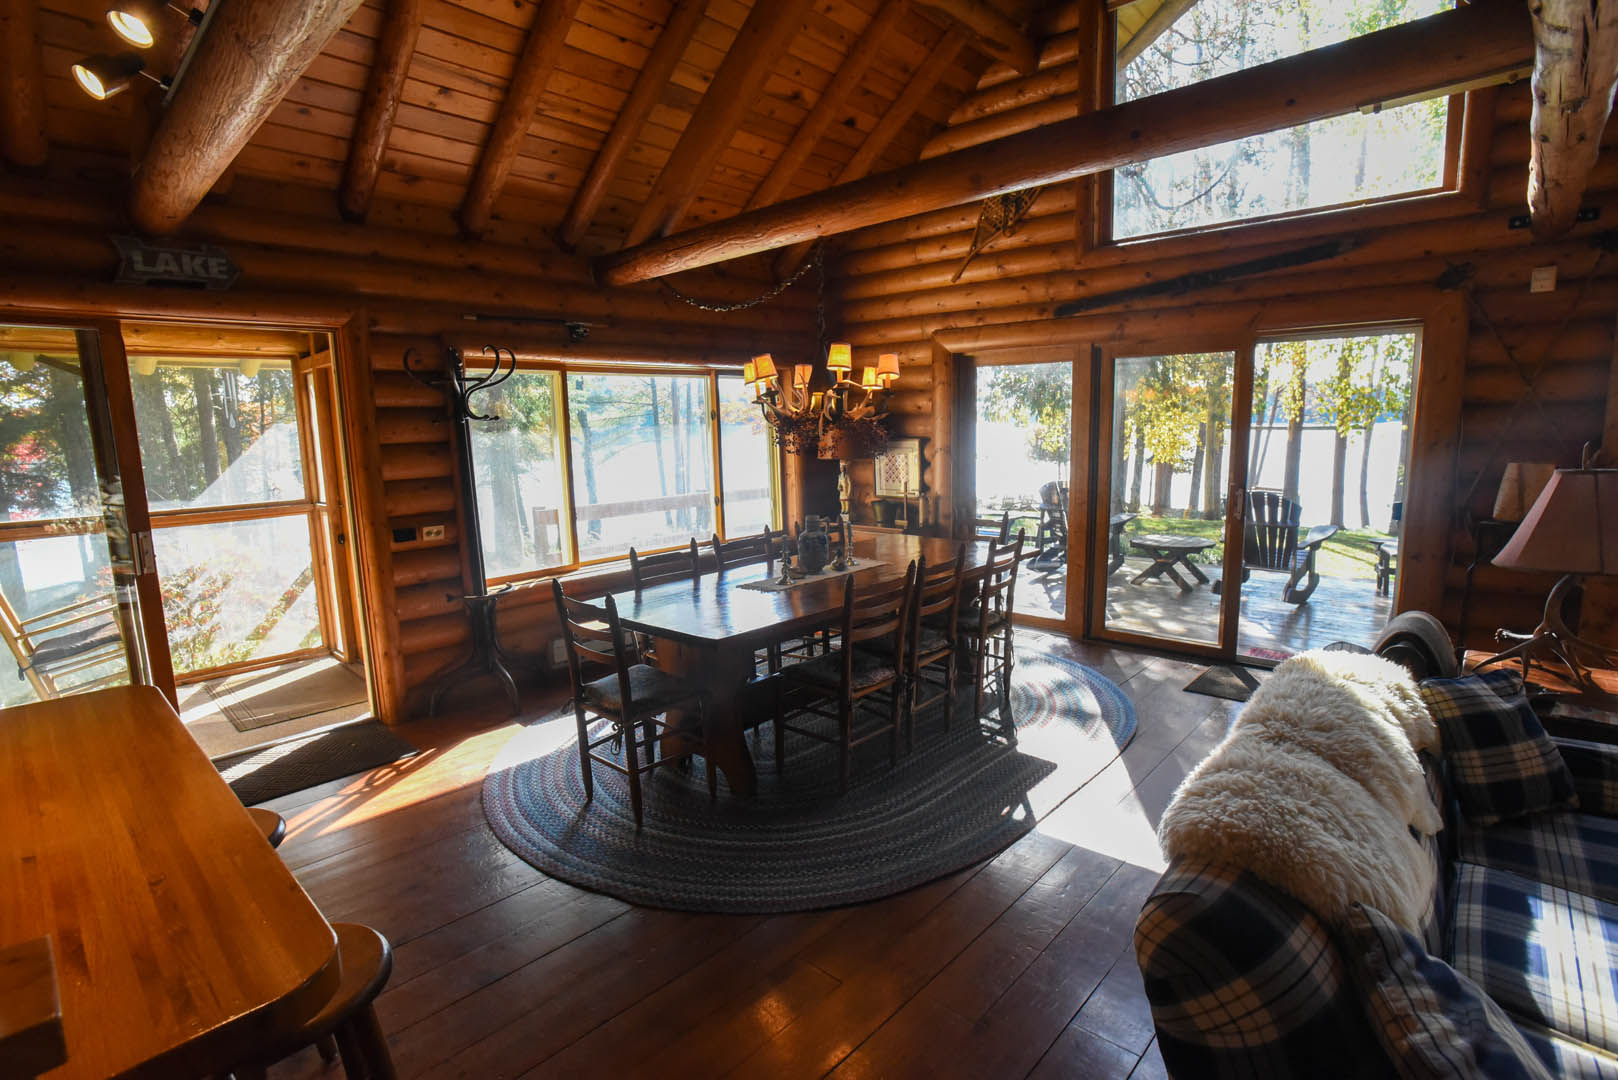 A look at the inside of the Jagdschloss Four Mile Lake Rental